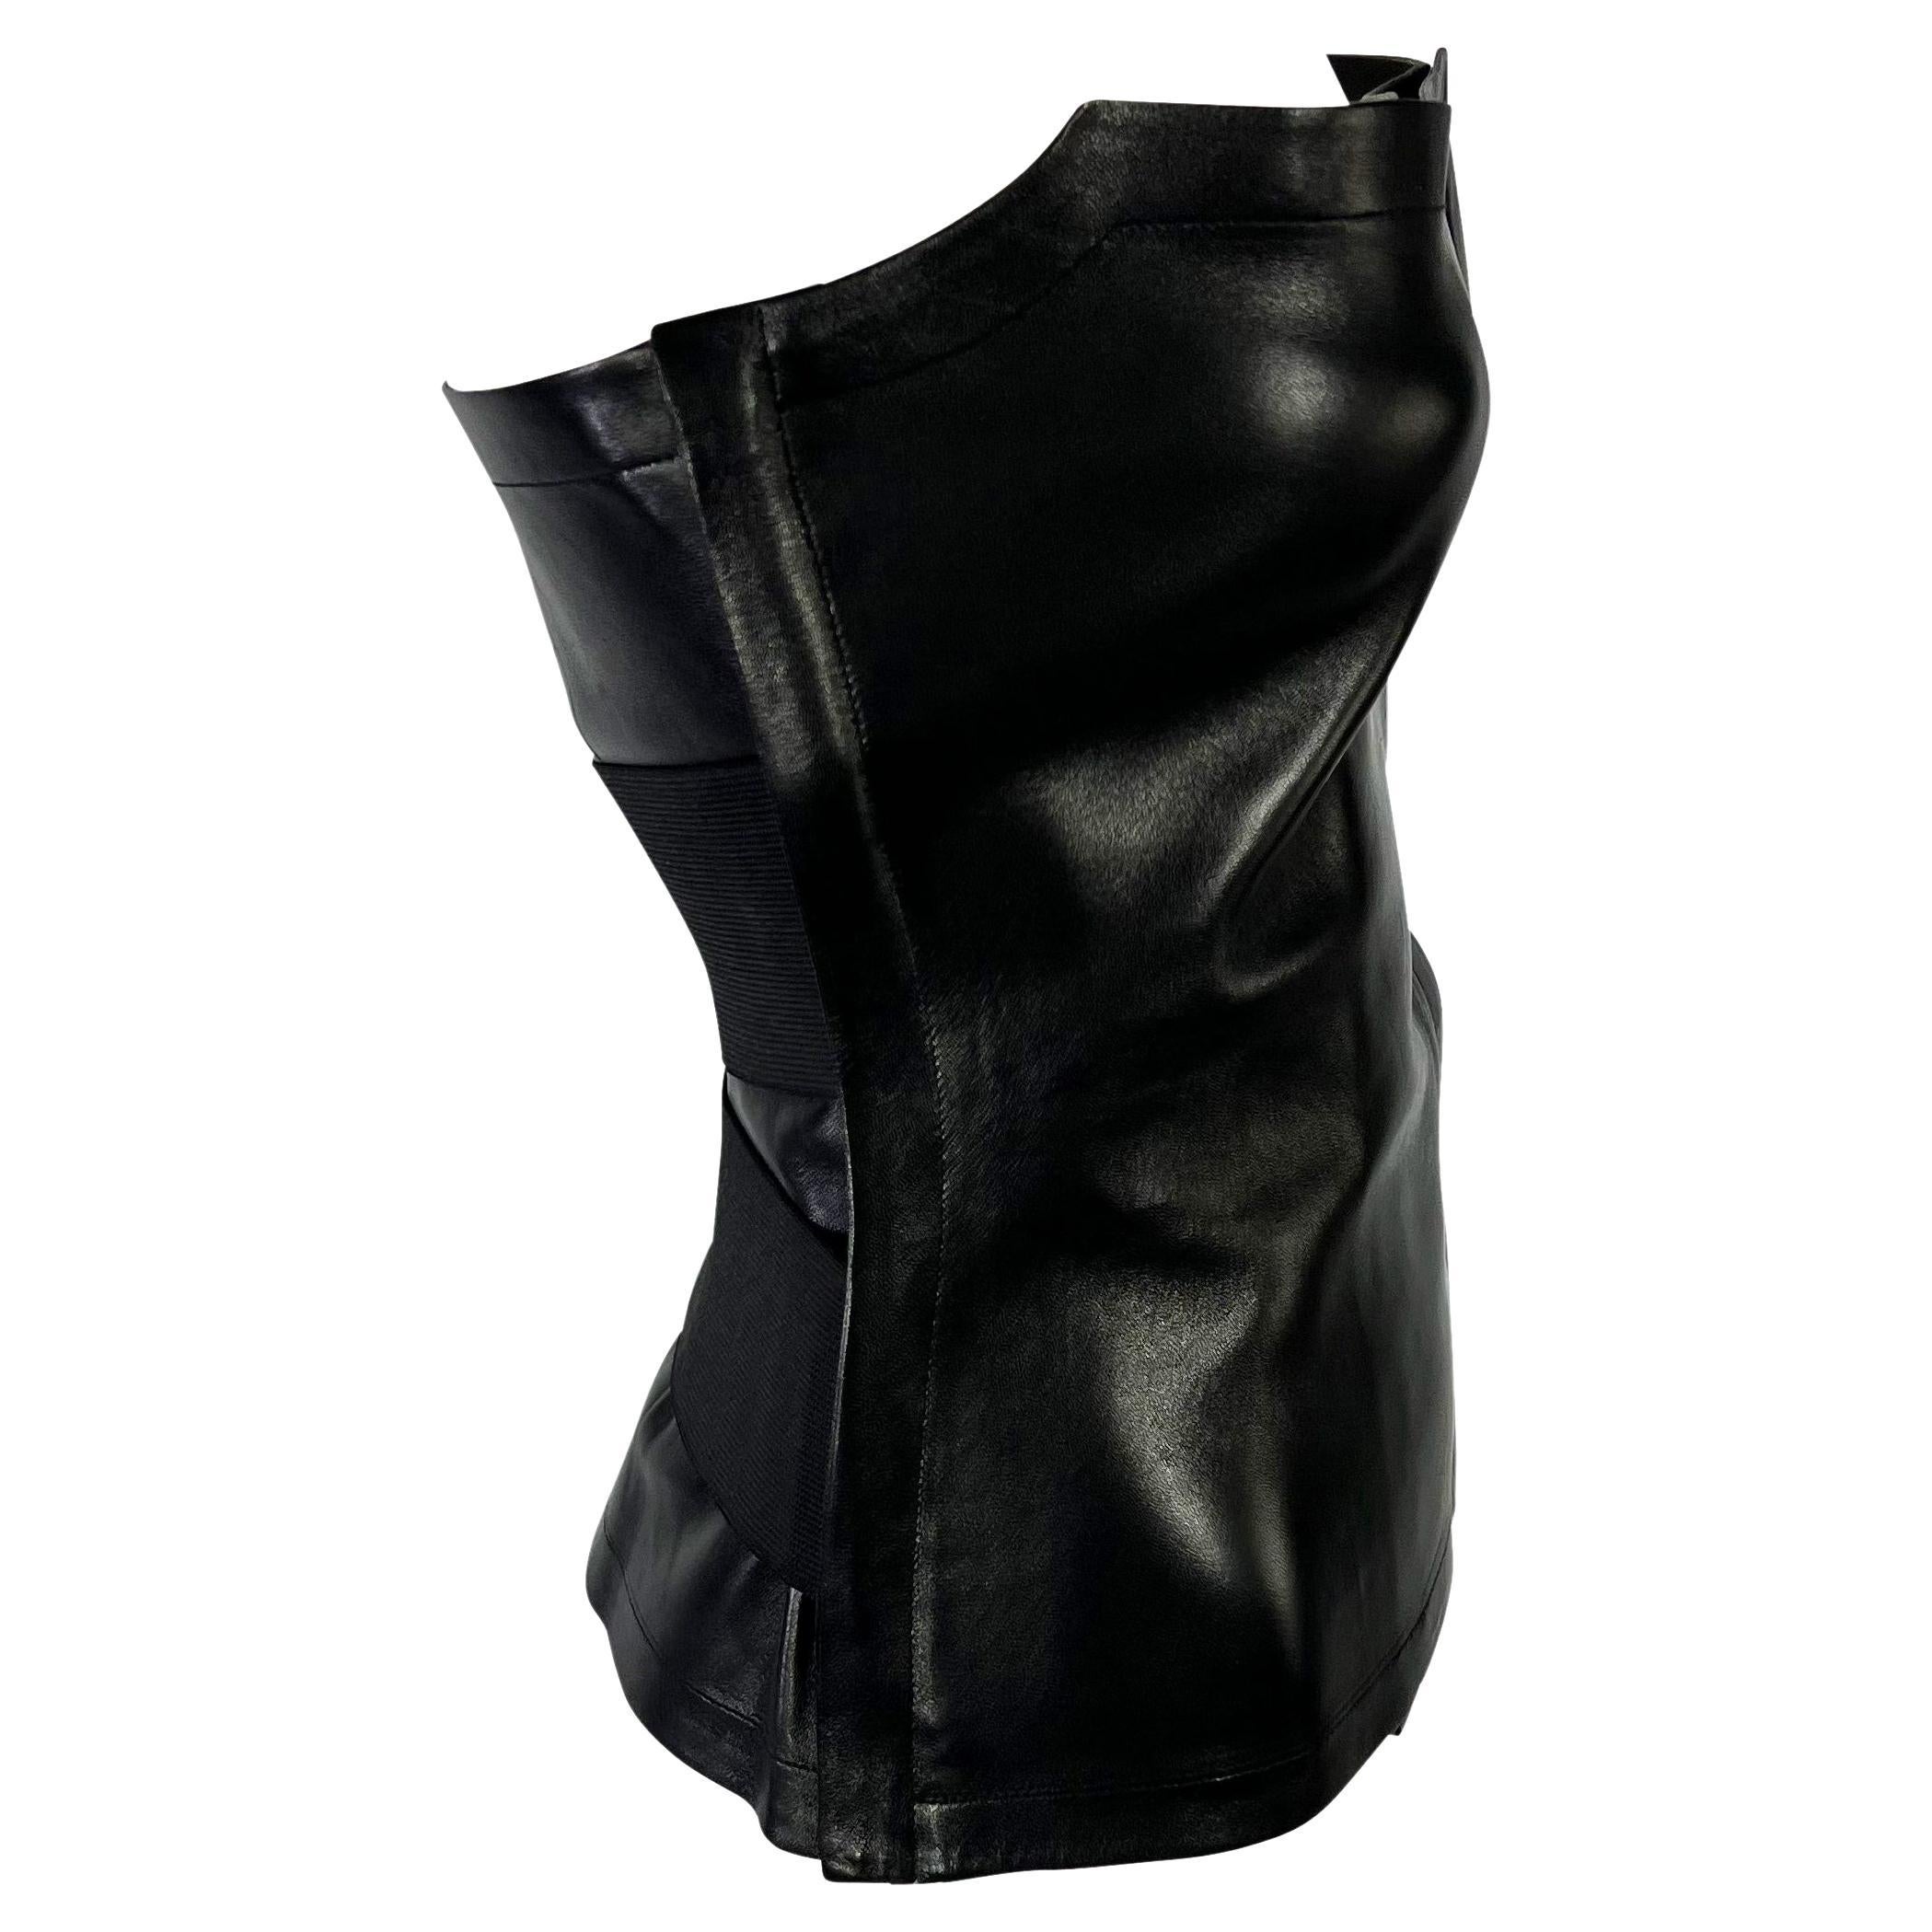 NWT S/S 2001 Yves Saint Laurent by Tom Ford Black Leather Bandage Strap Bustier For Sale 1